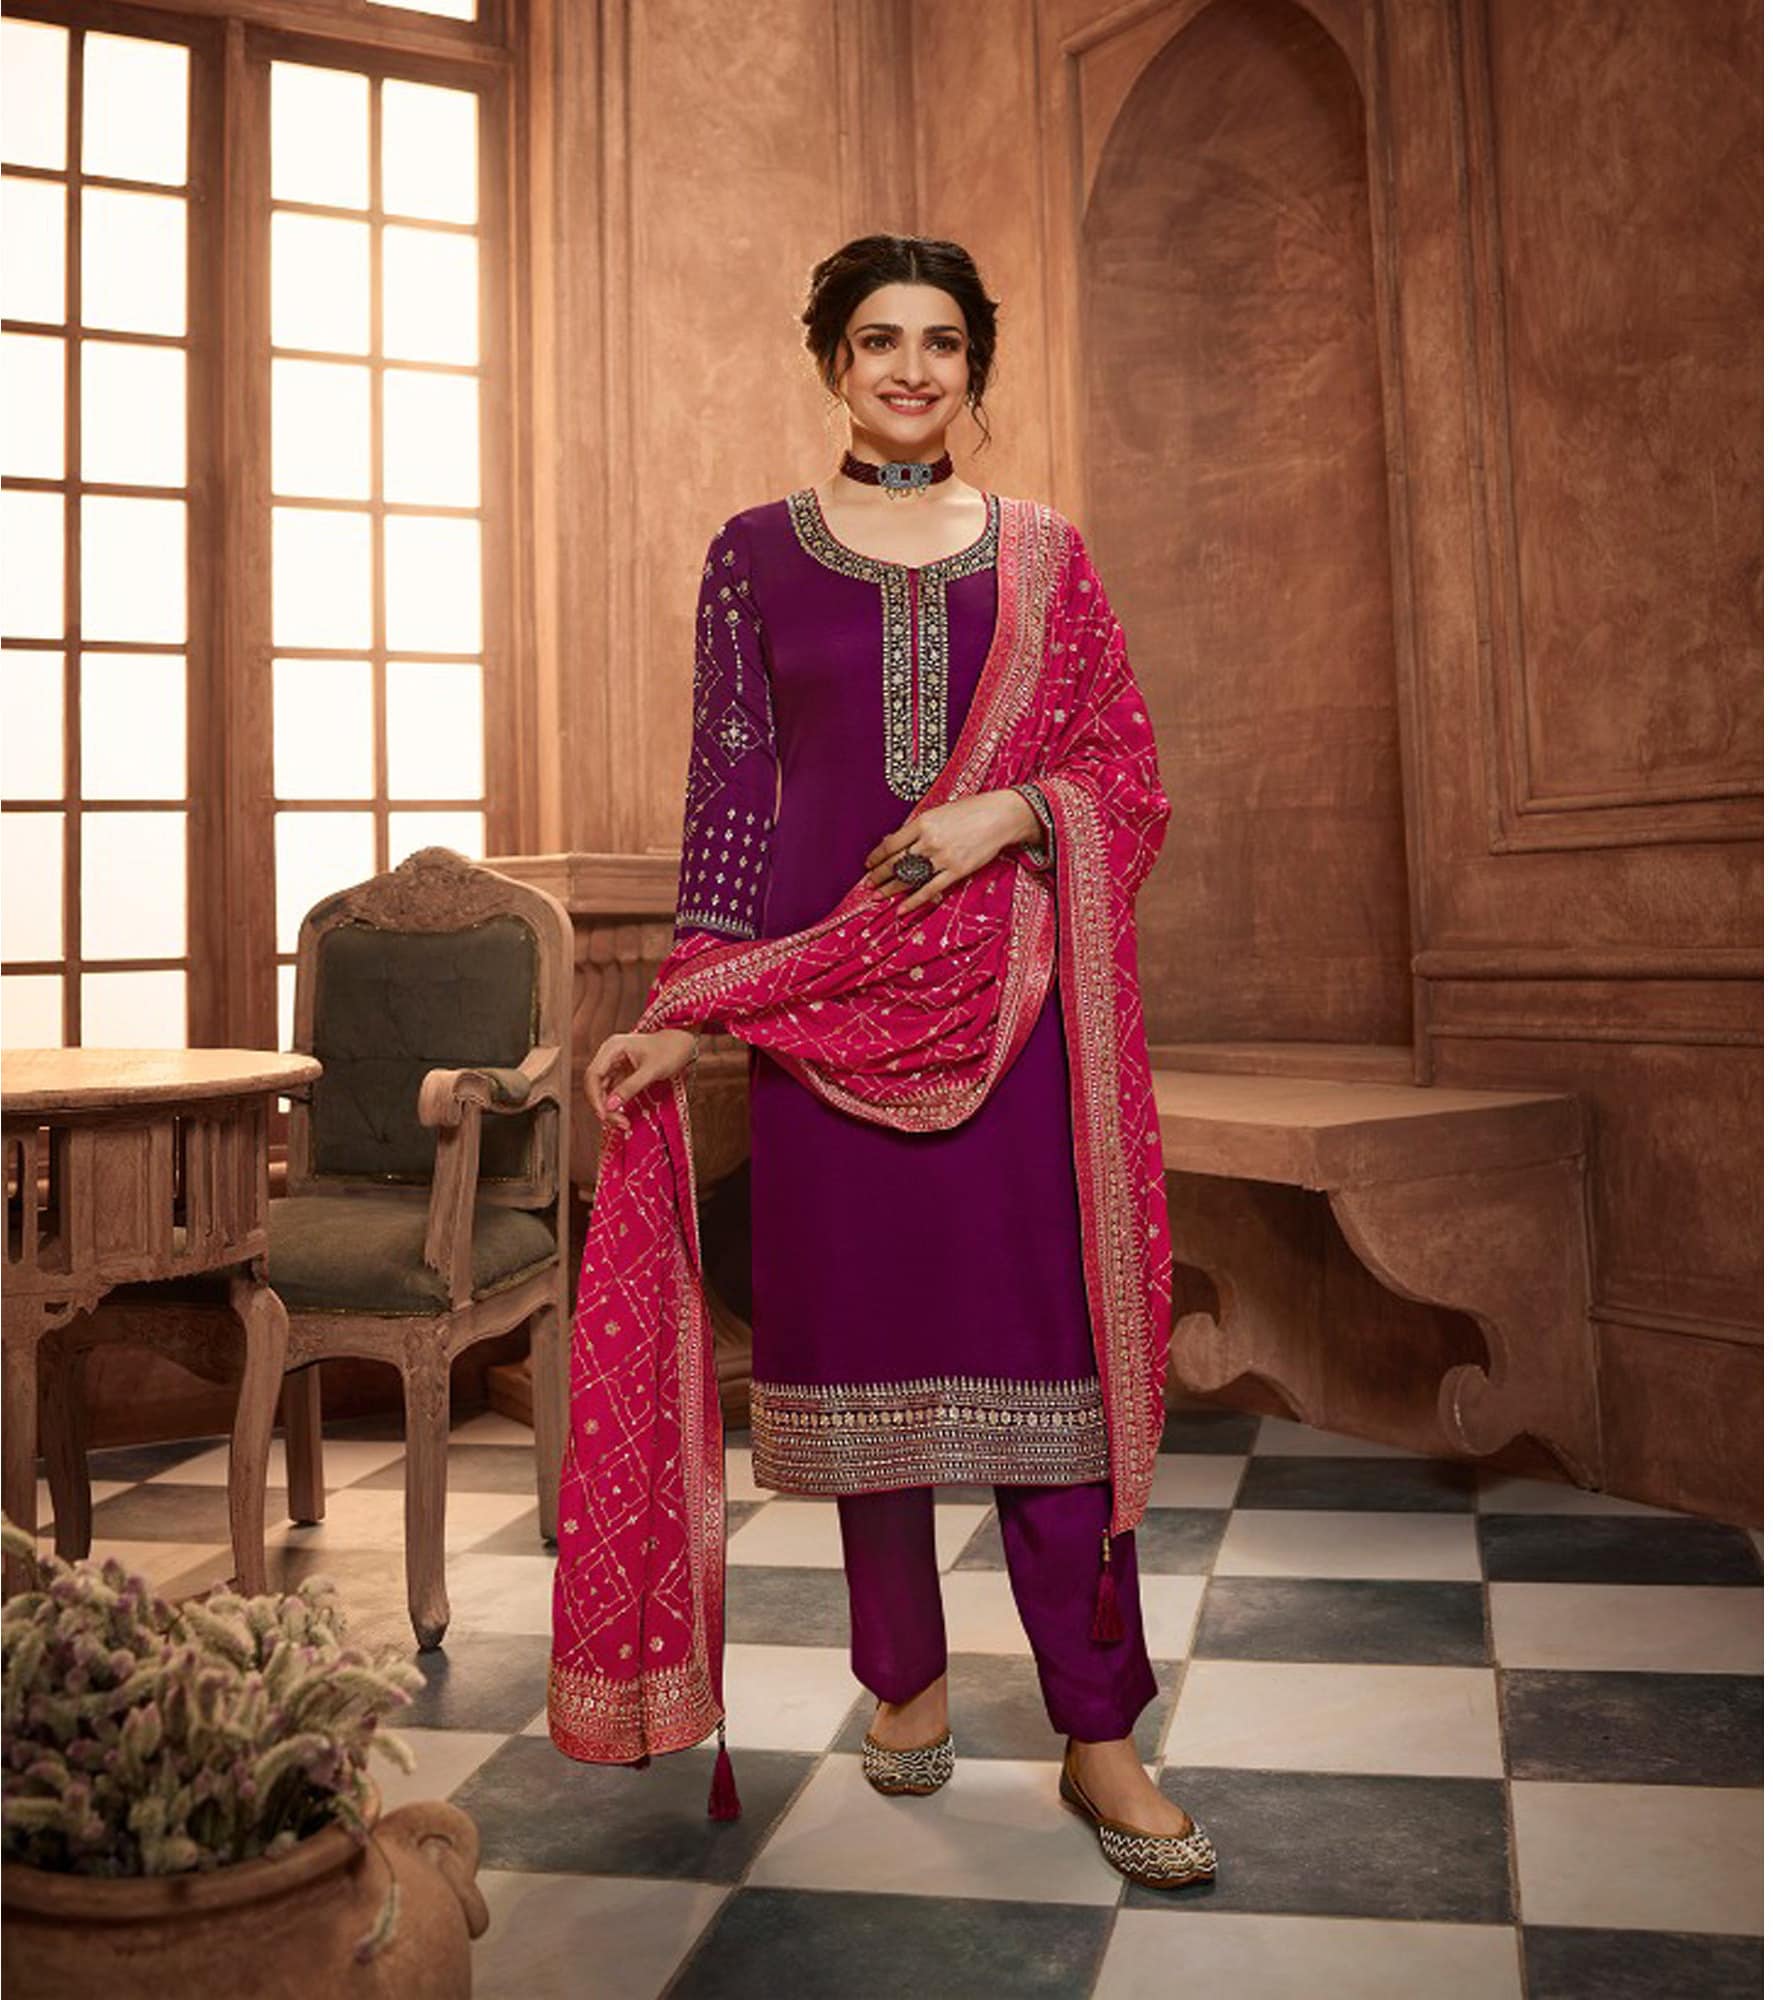 Buy Liklee Women's Georgette Embroidered Work Semi Stitched Purple Salwar  Suit Dress Material With Georgette Purple Dupatta at Amazon.in